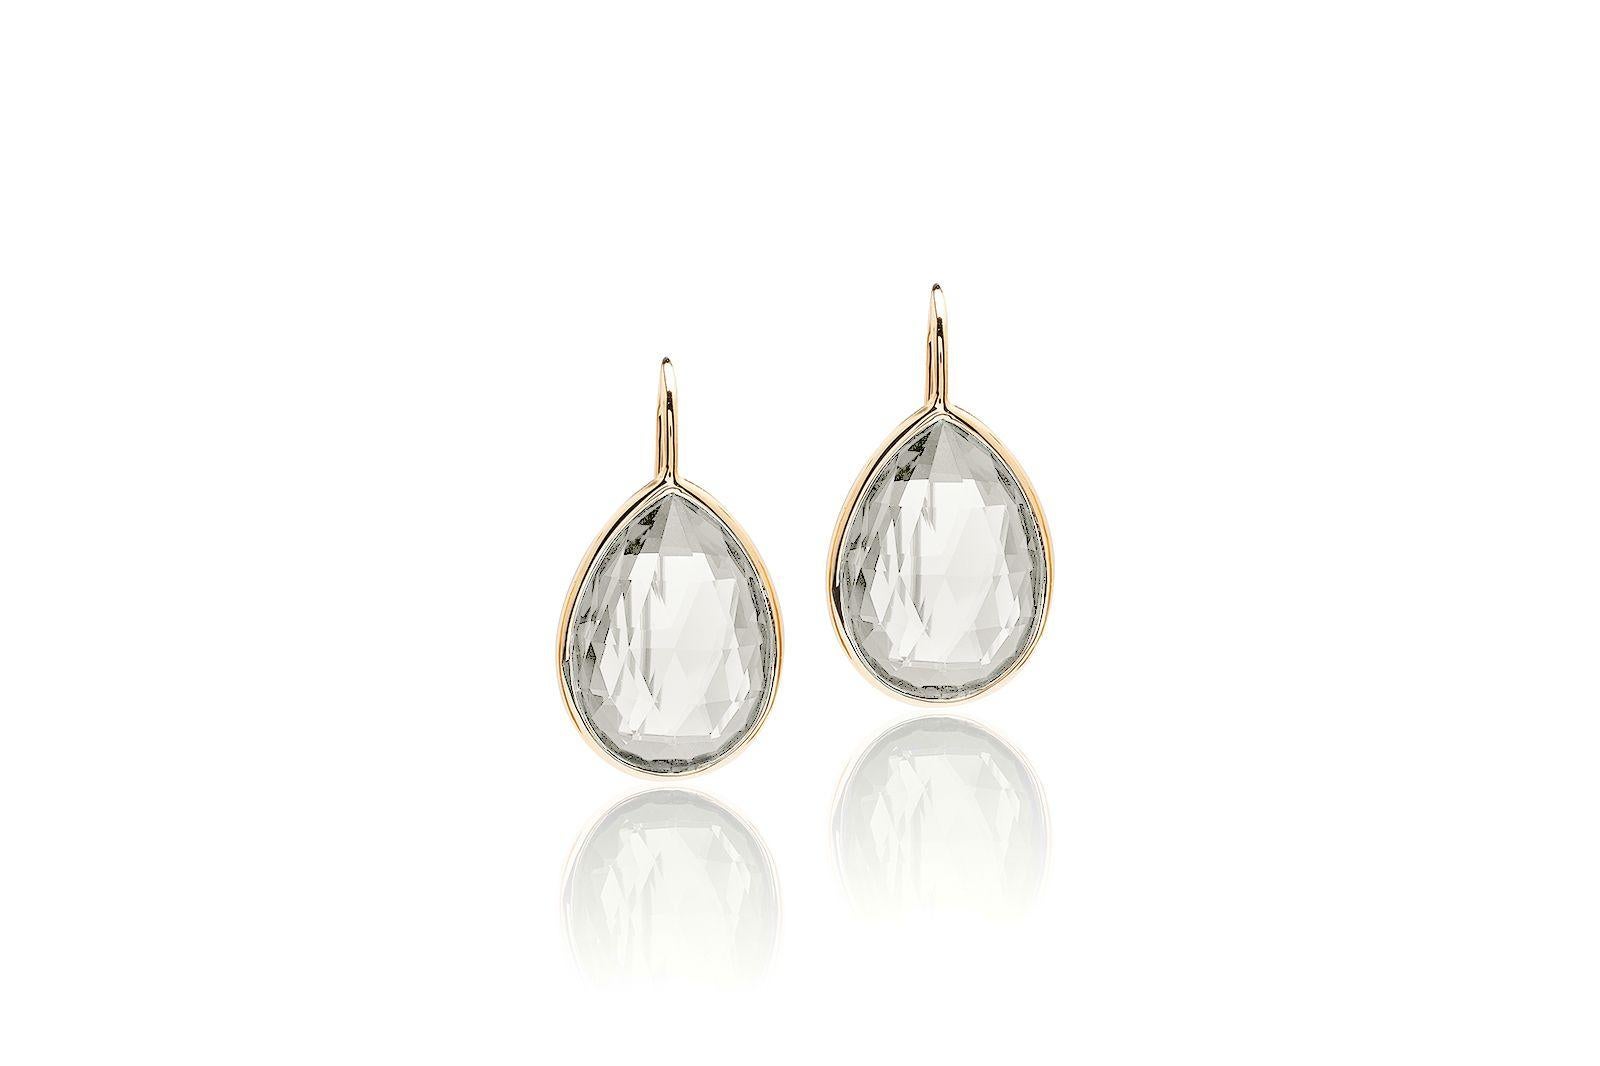 Rock Crystal Pear Shape Briolette Earrings on Wire in 18K Yellow Gold, from 'Gossip' Collection

Stone Size: 10 x 14 mm 

Gemstone Approx Wt: Rock Crystal  - 10.30 Carats